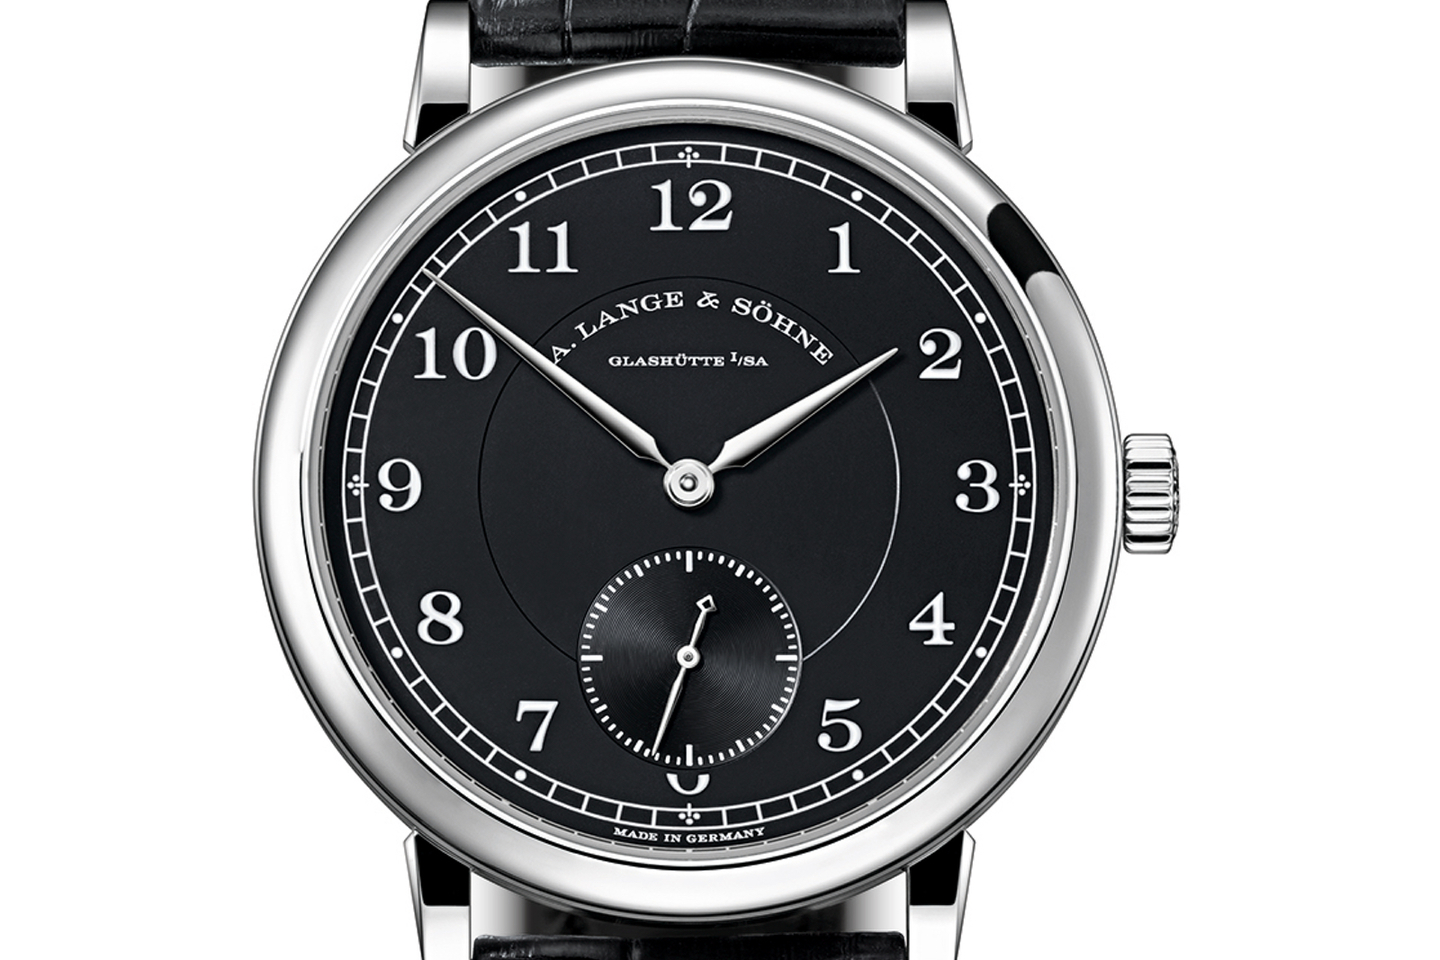 The 1815 “200th Anniversary F. A. Lange”